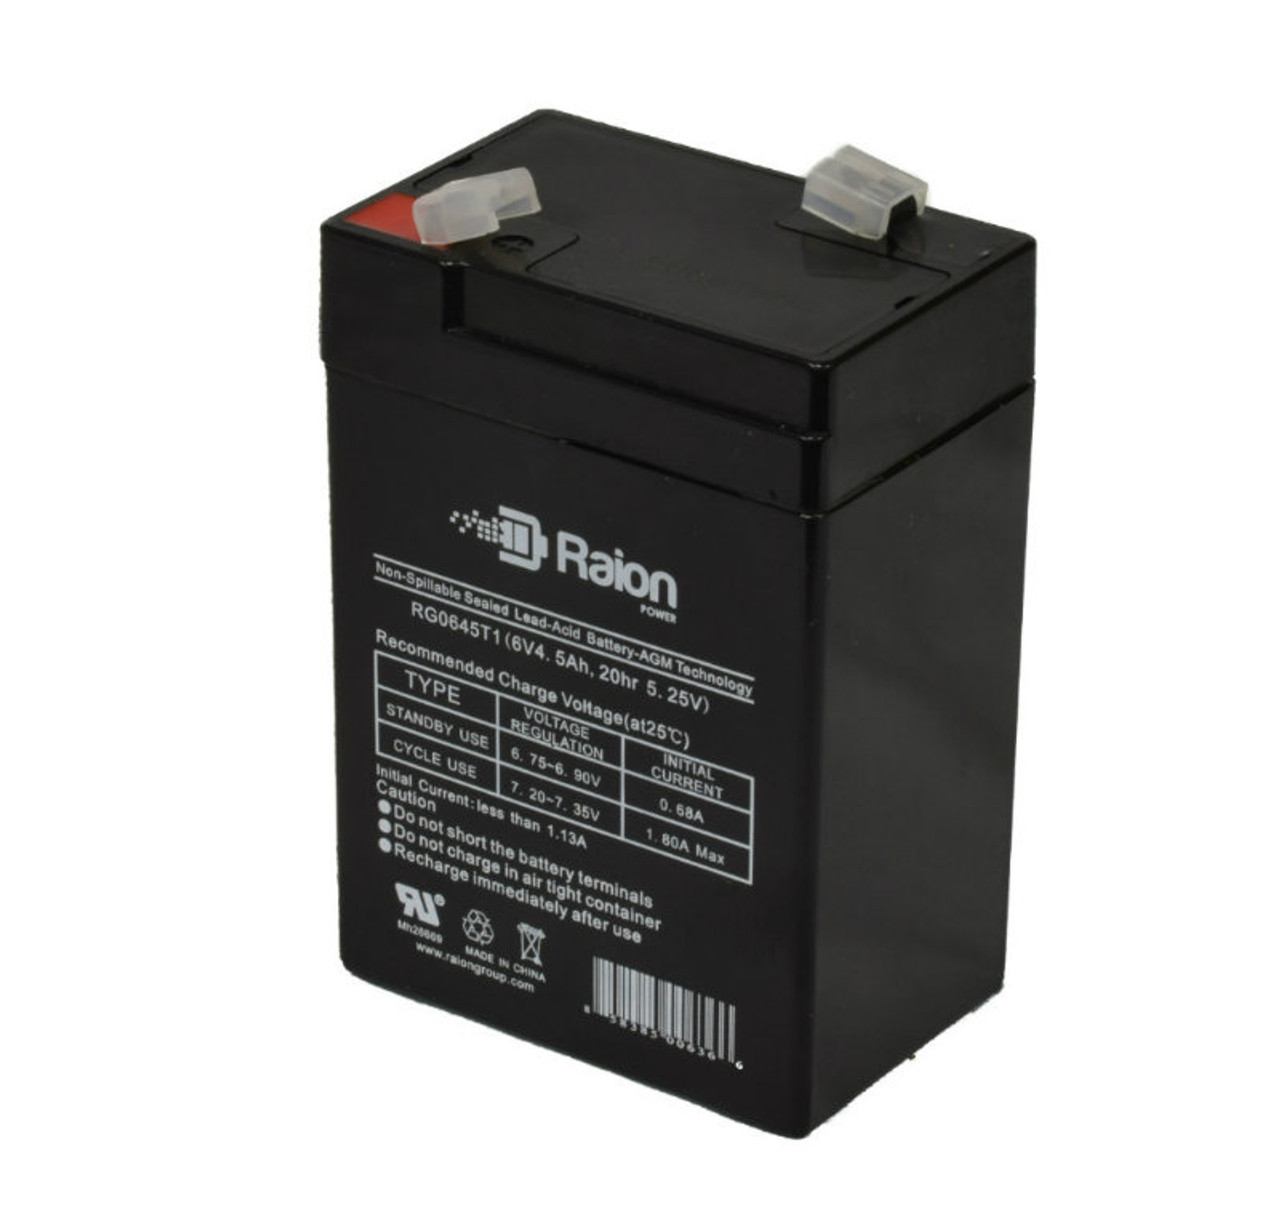 Raion Power RG0645T1 6V 4.5Ah Replacement Battery Cartridge for SeaWill SW640A